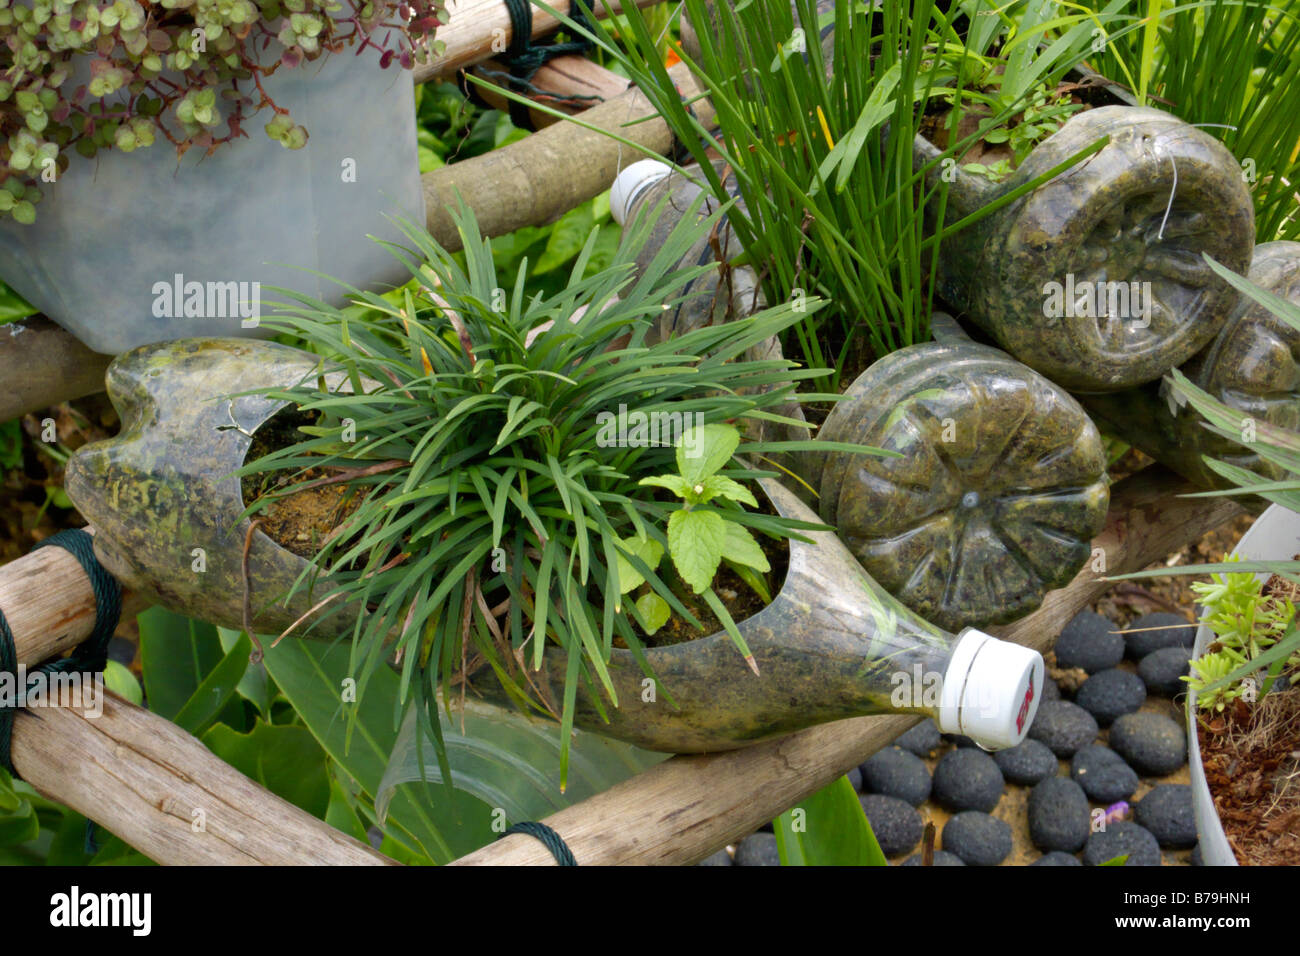 Flower pots made of used plastic bottles Stock Photo